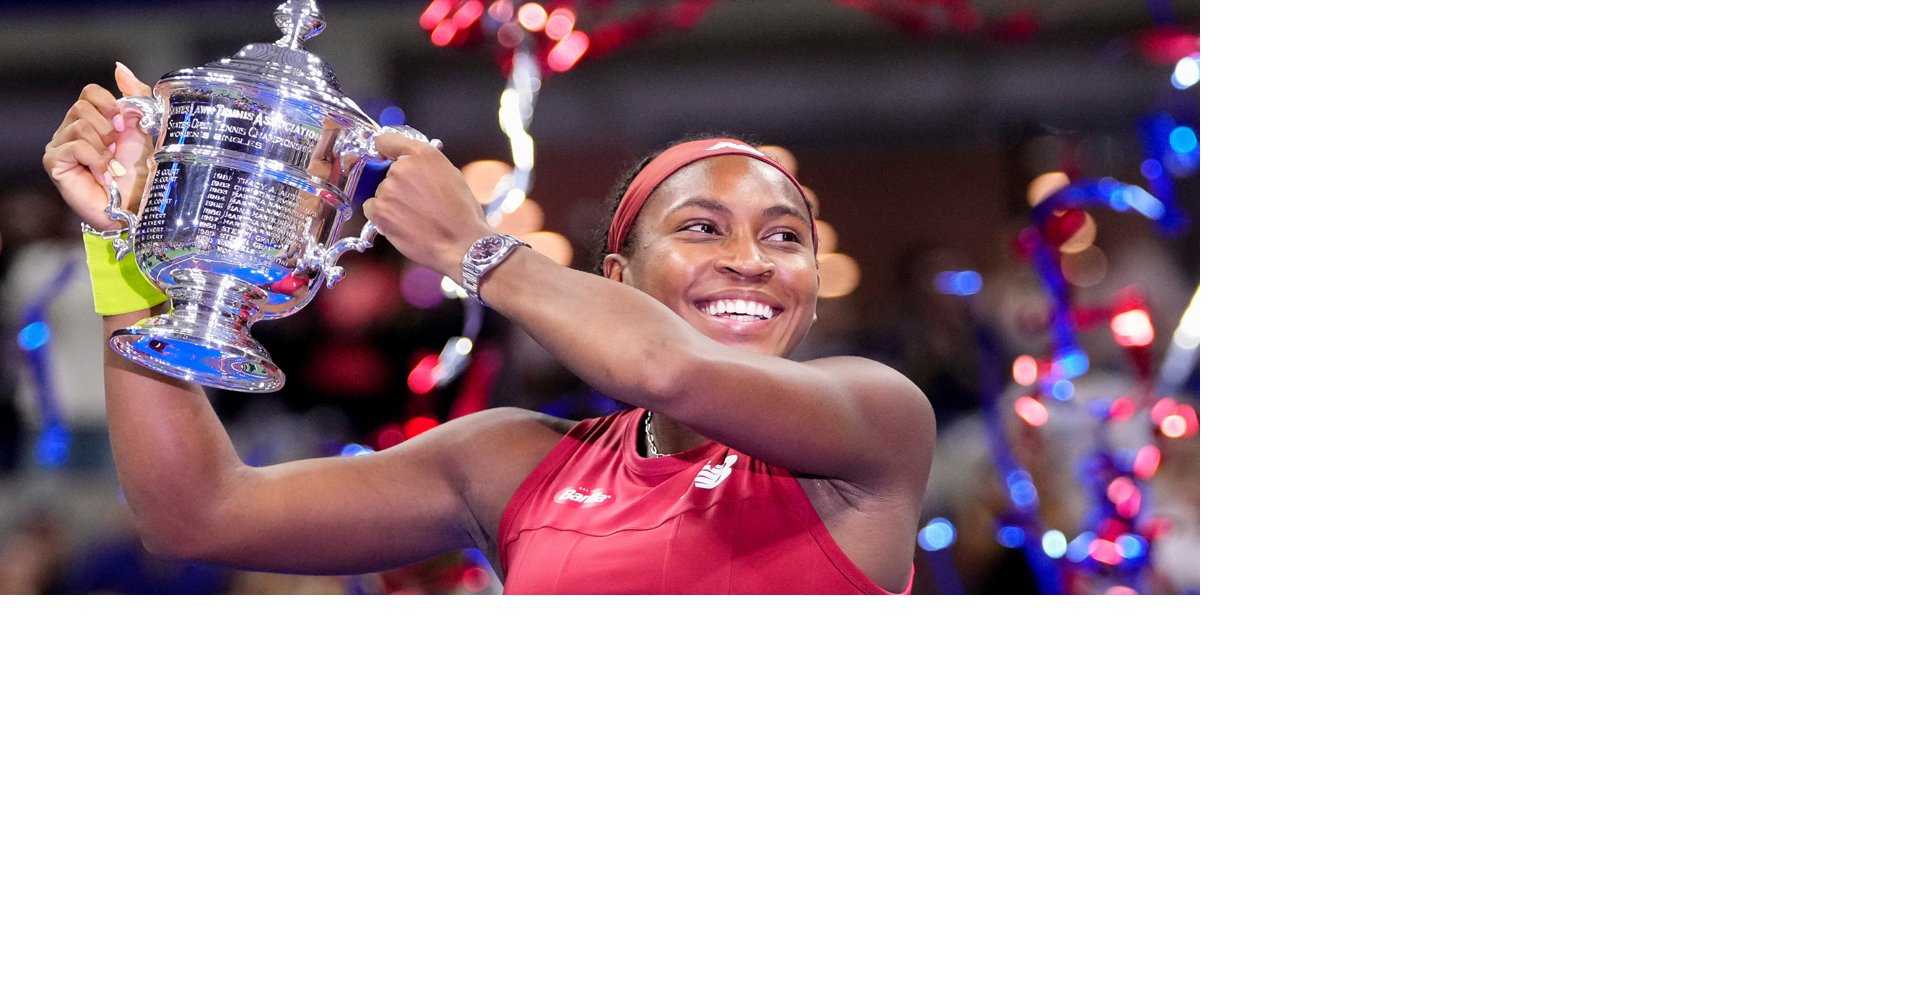 Coco Gauff wins the US Open for her first Grand Slam title at age 19, News